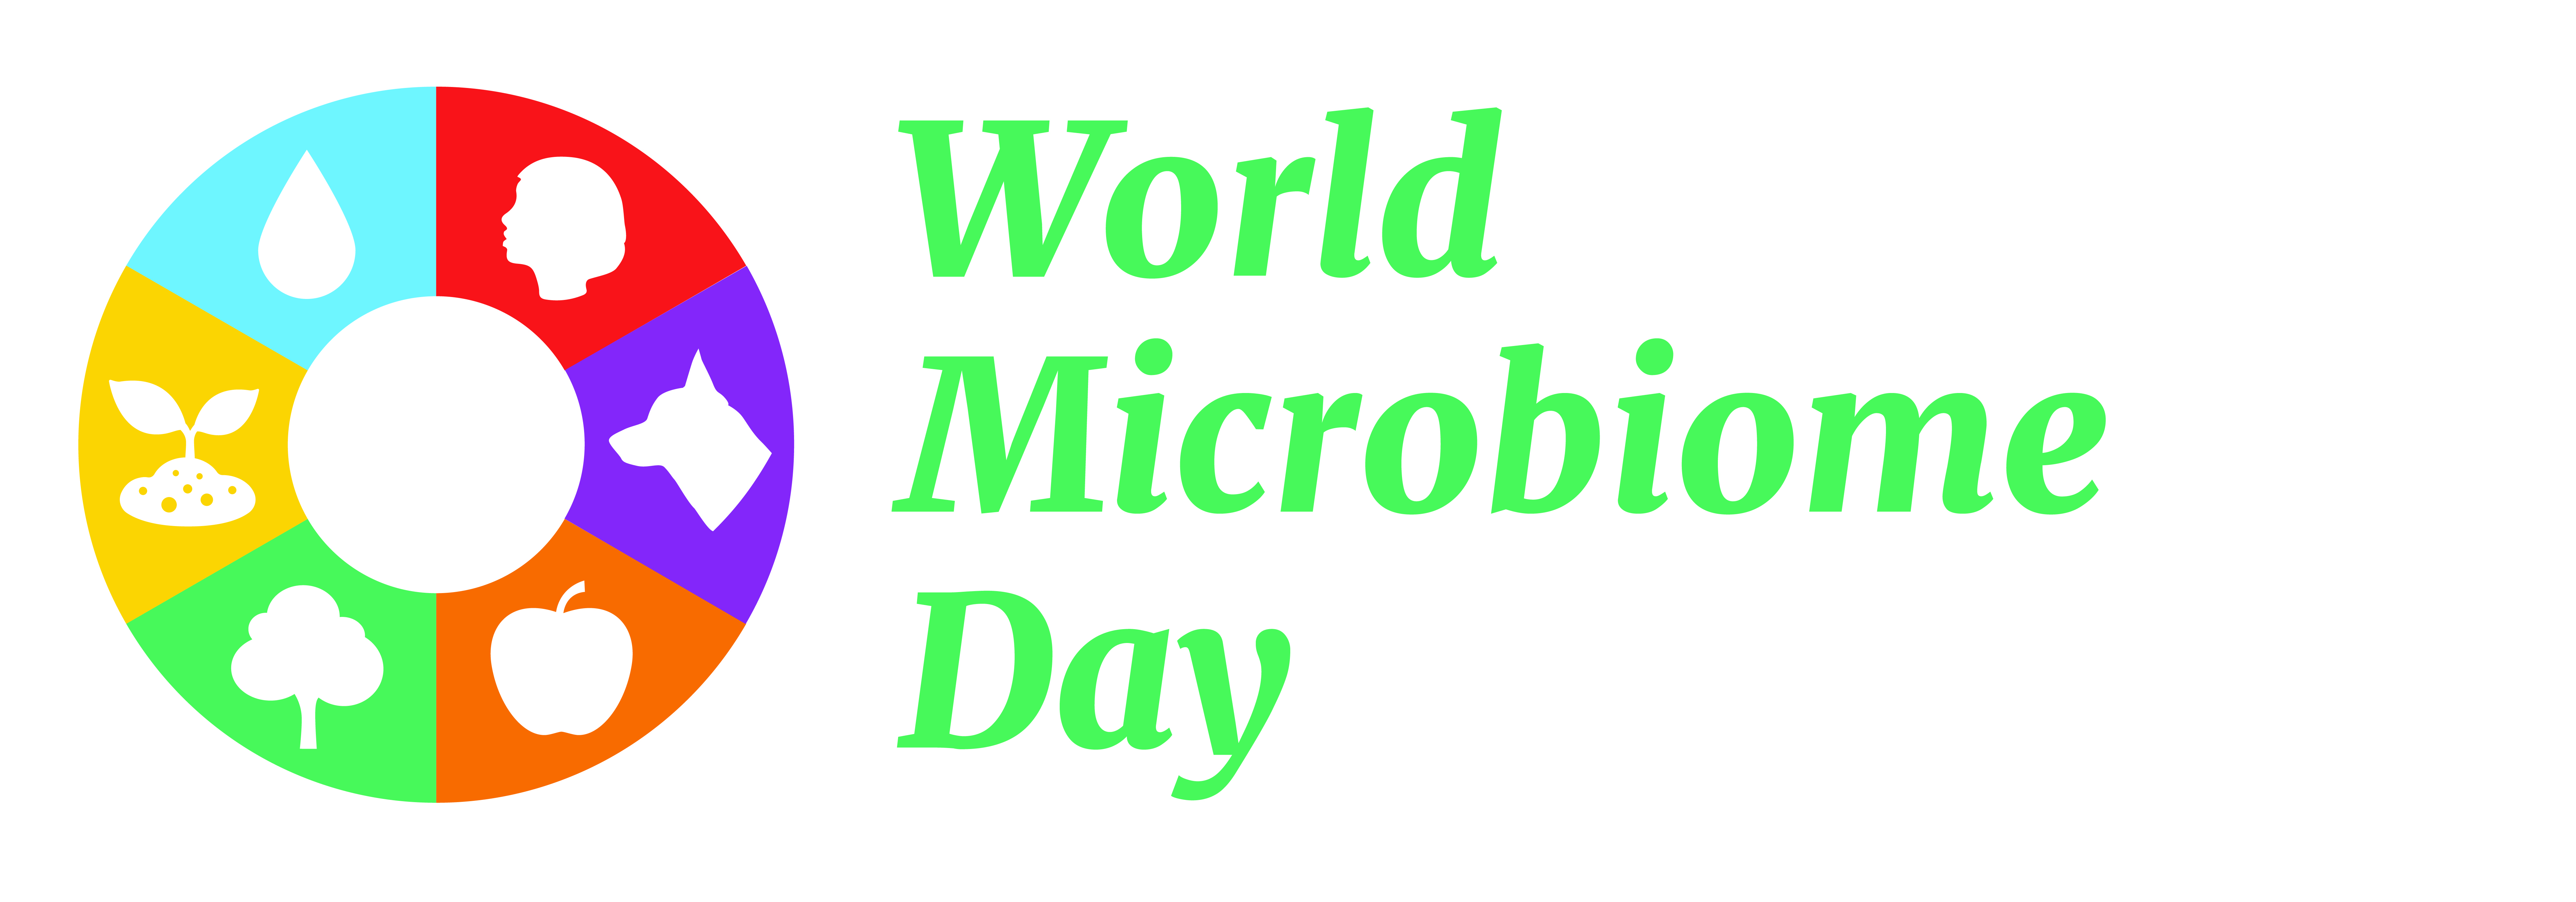 World Microbiome Day 2023: Microbes and Food